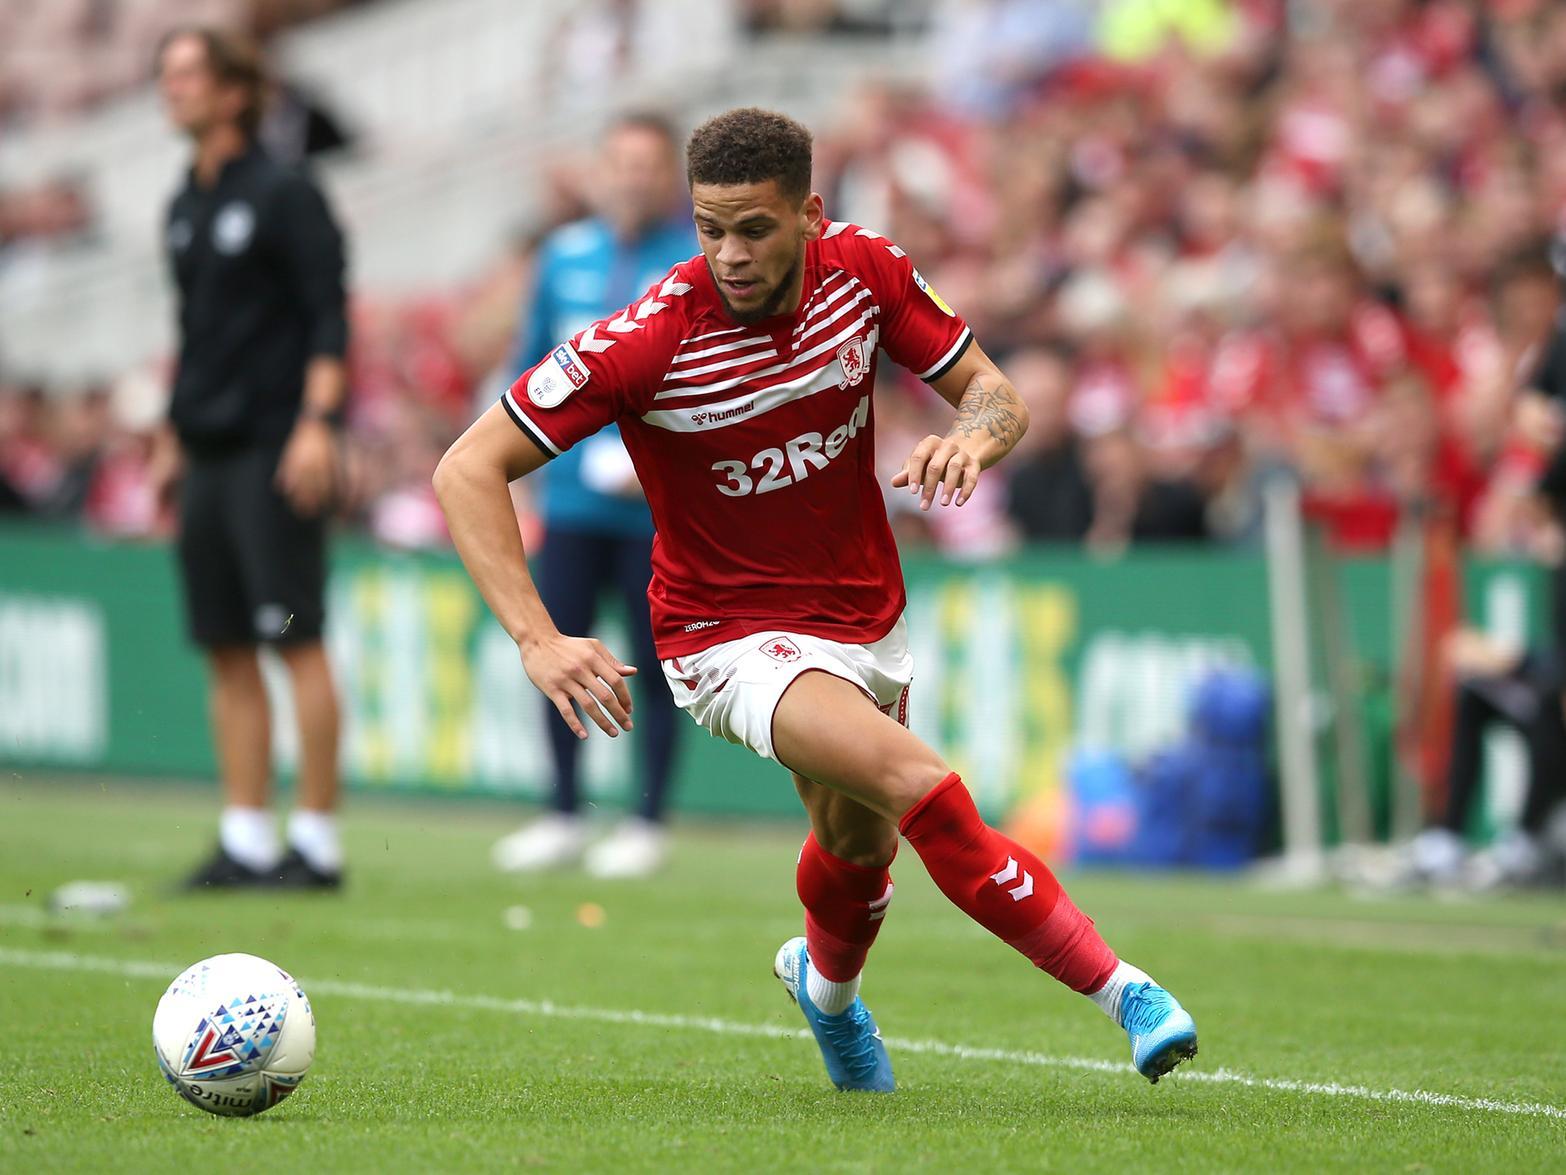 Coventry City, Doncaster and Oxford United are interested in Middlesbrough winger Marcus Browne. (Football Insider)